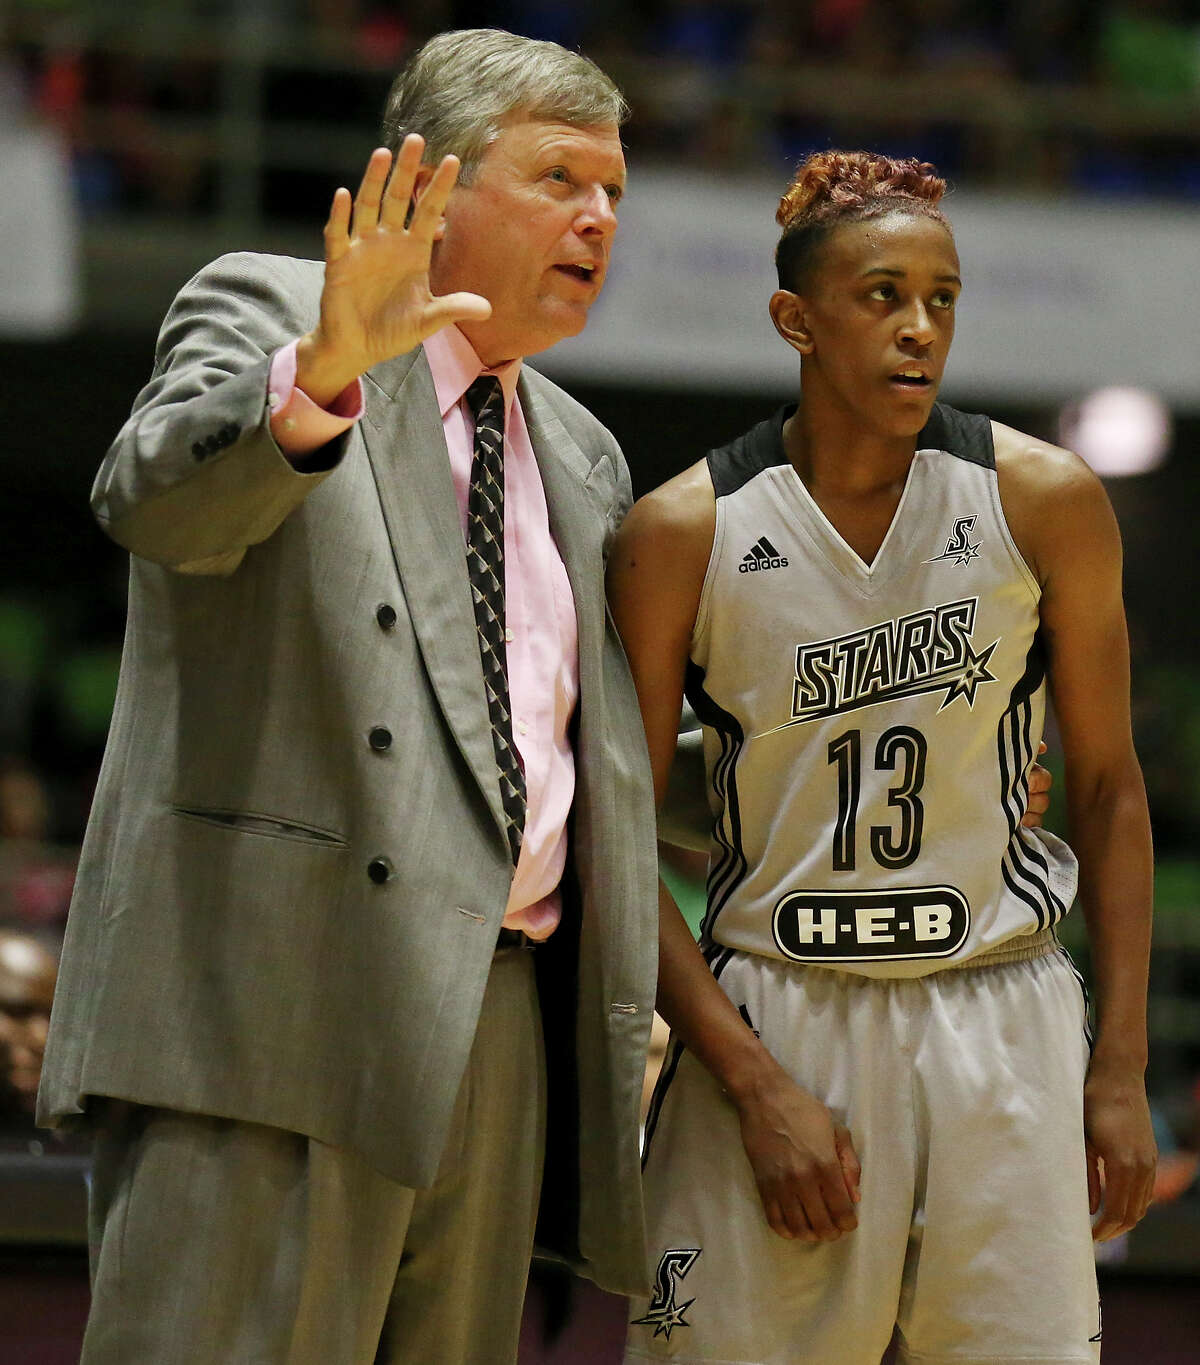 San Antonio Stars head coach Dan Hughes (left) talks with player Danielle Robinson during first half action against the Tulsa Shock Friday July 17, 2015 at the Freeman Coliseum.